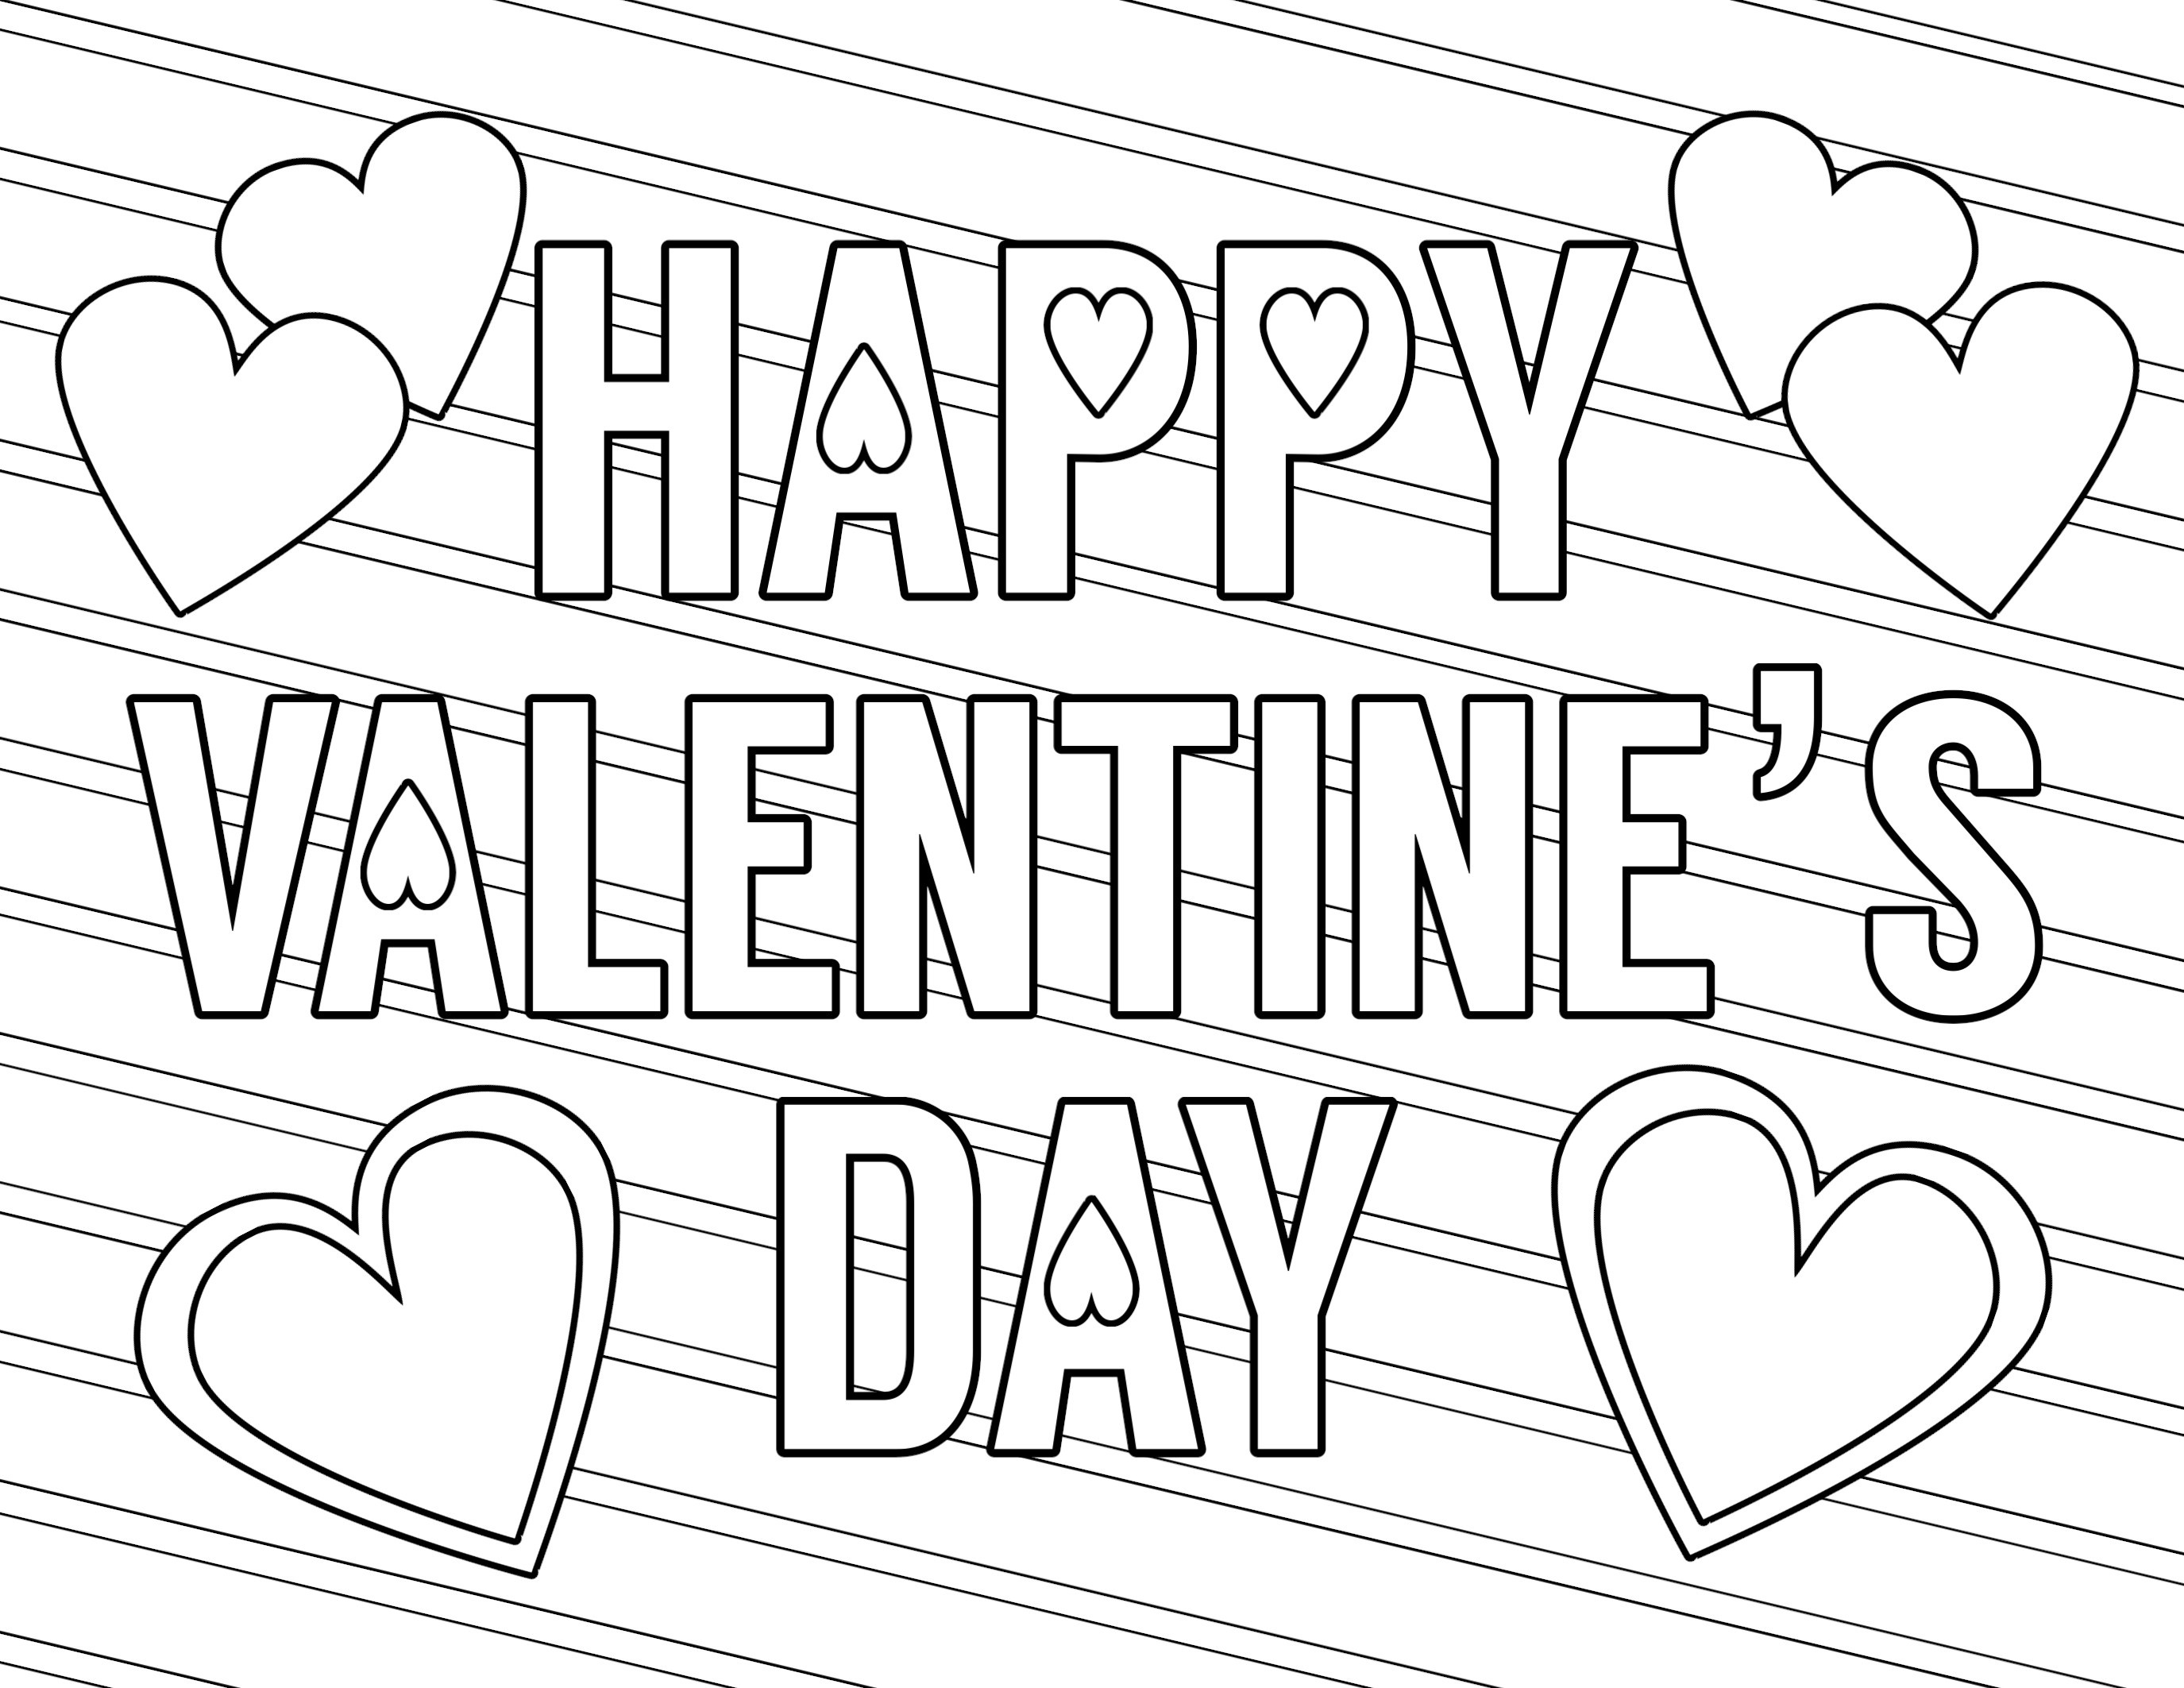 Coloring Ideas : Stunning Free Valentines Day Coloring Pages Page - Free Printable Valentine Coloring Pages